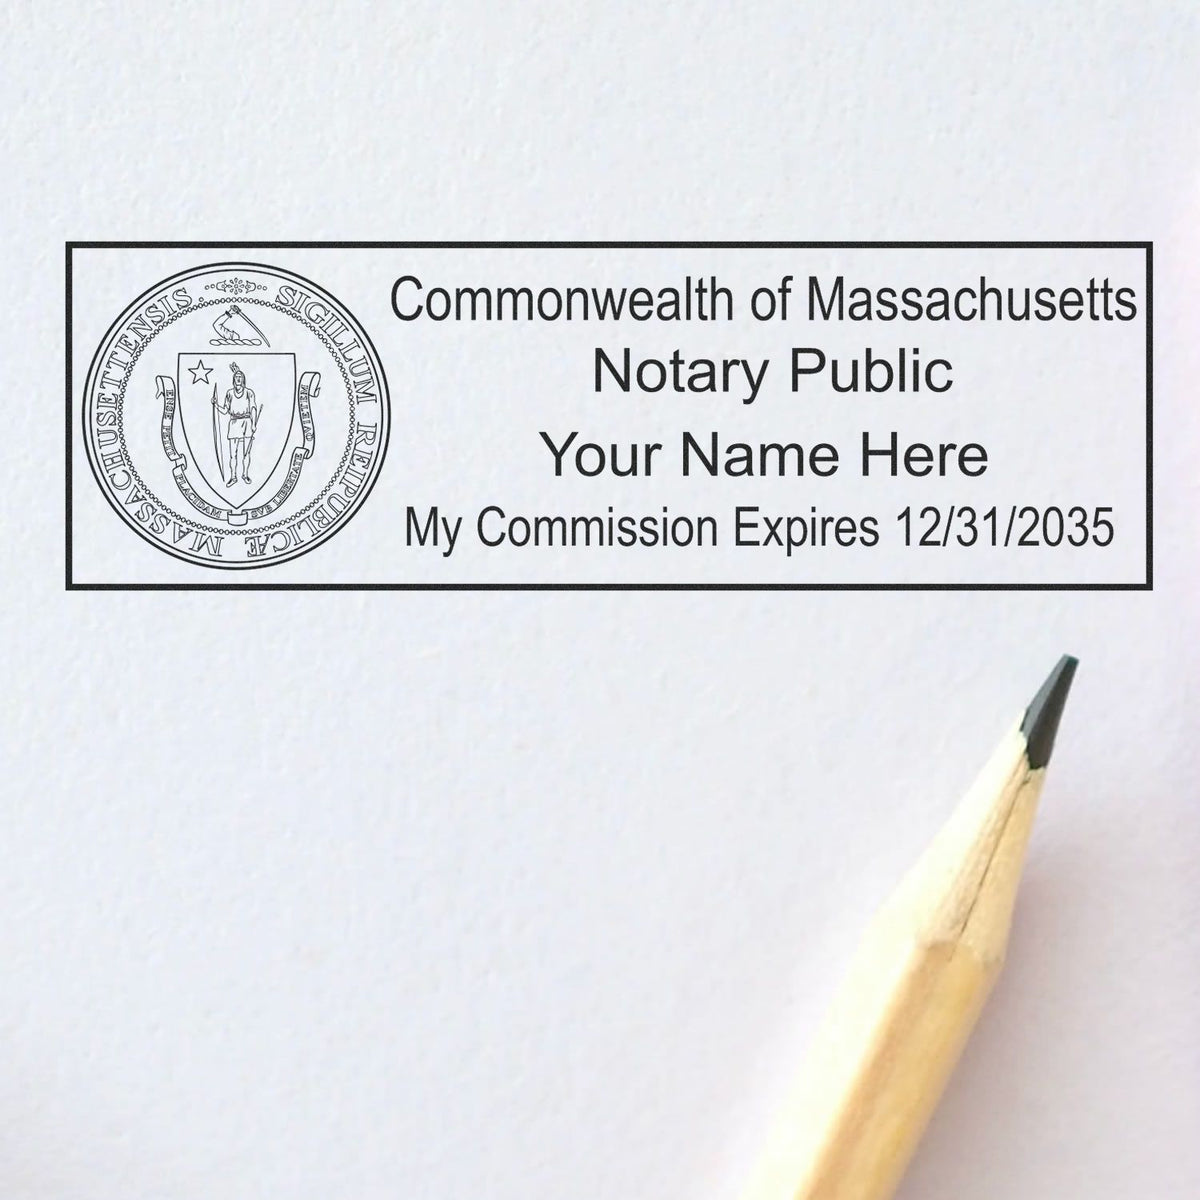 Another Example of a stamped impression of the Super Slim Massachusetts Notary Public Stamp on a piece of office paper.